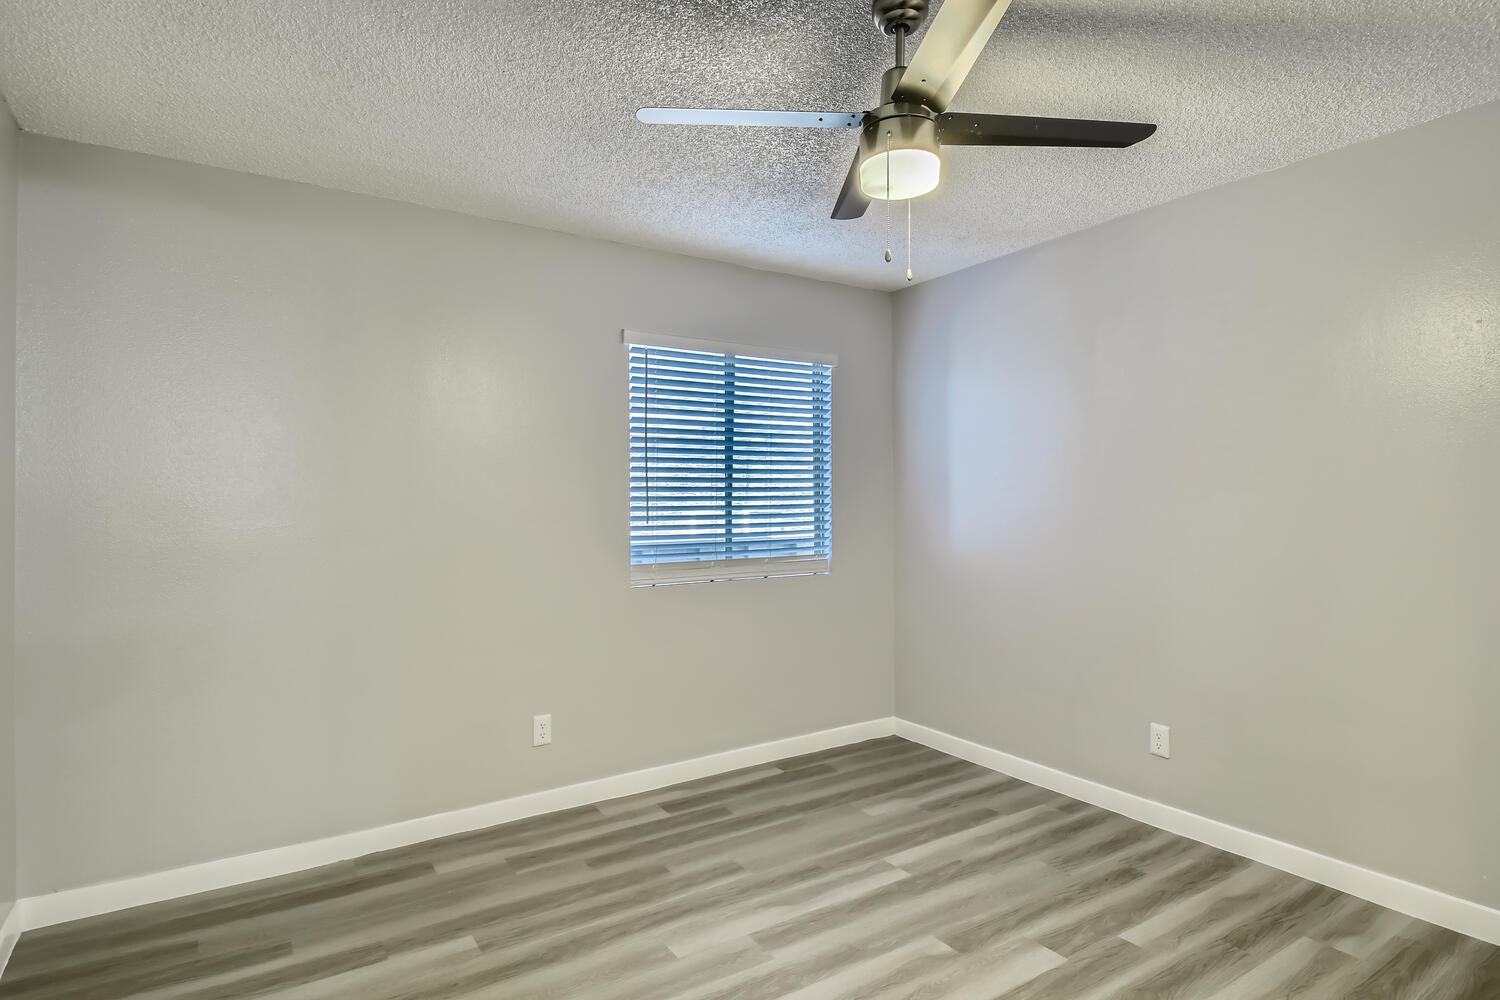 A bedroom with wood-style flooring, a ceiling fan, and a window at Rise North Ridge.